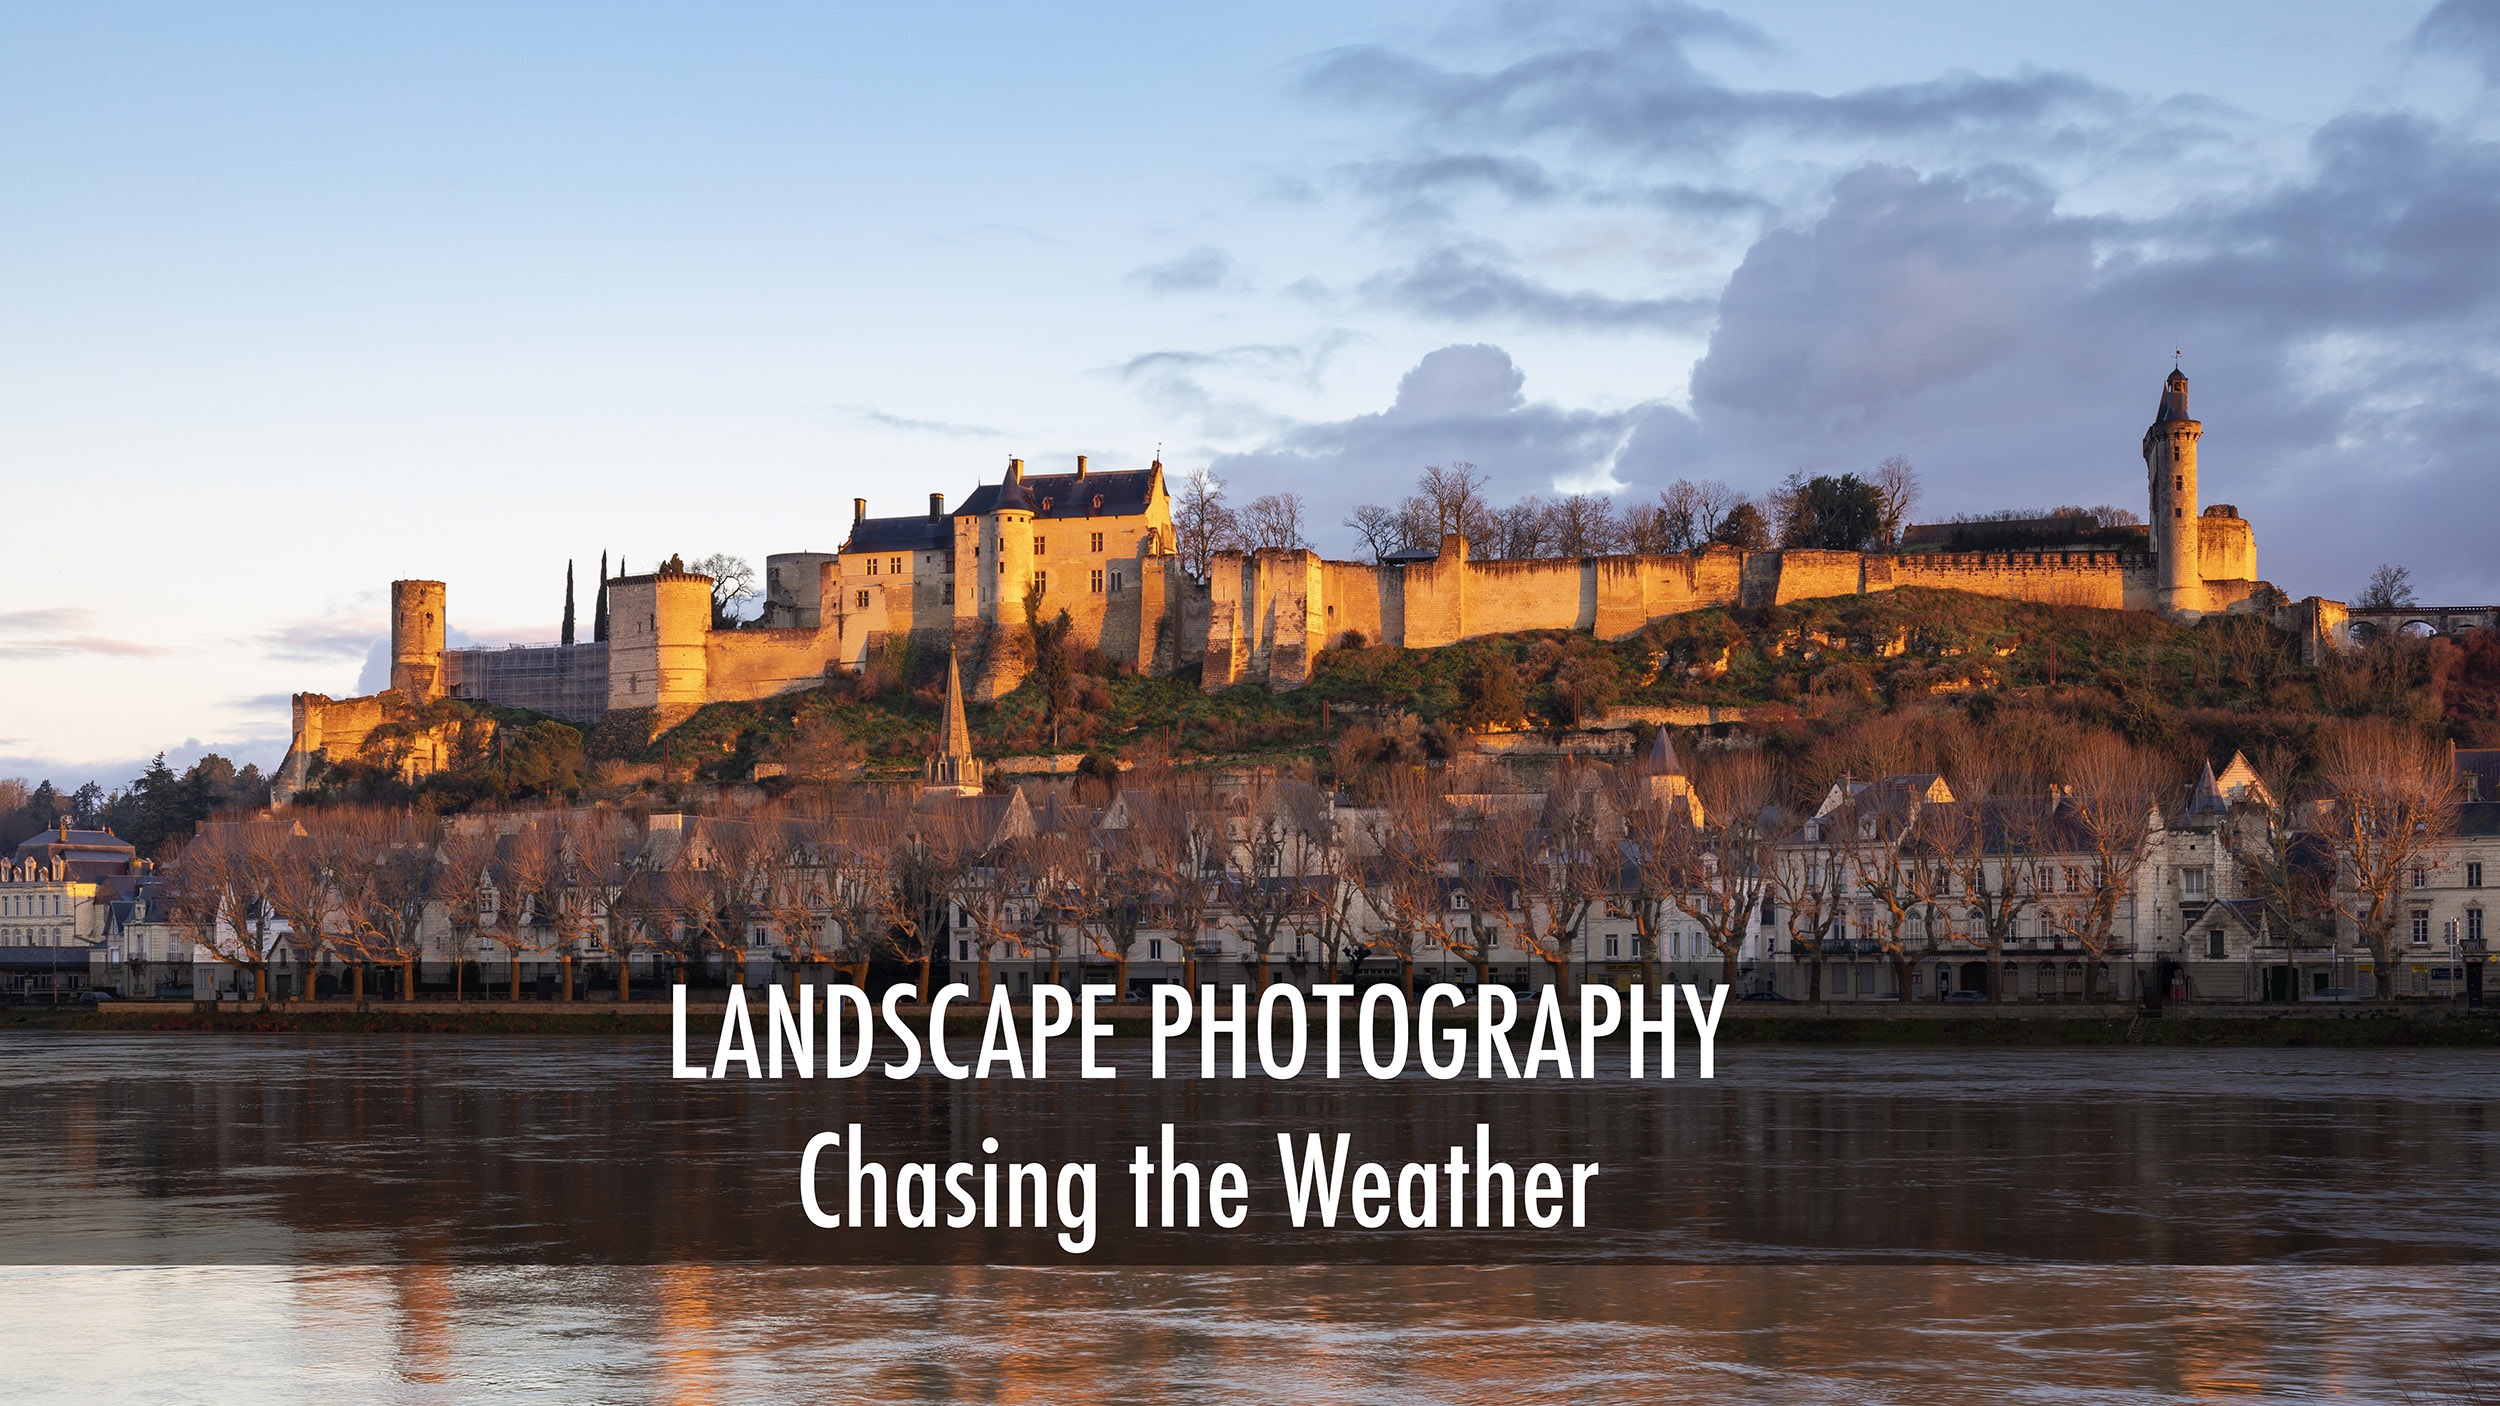 Landscape photography. Chasing the weather in the Loire Valley.